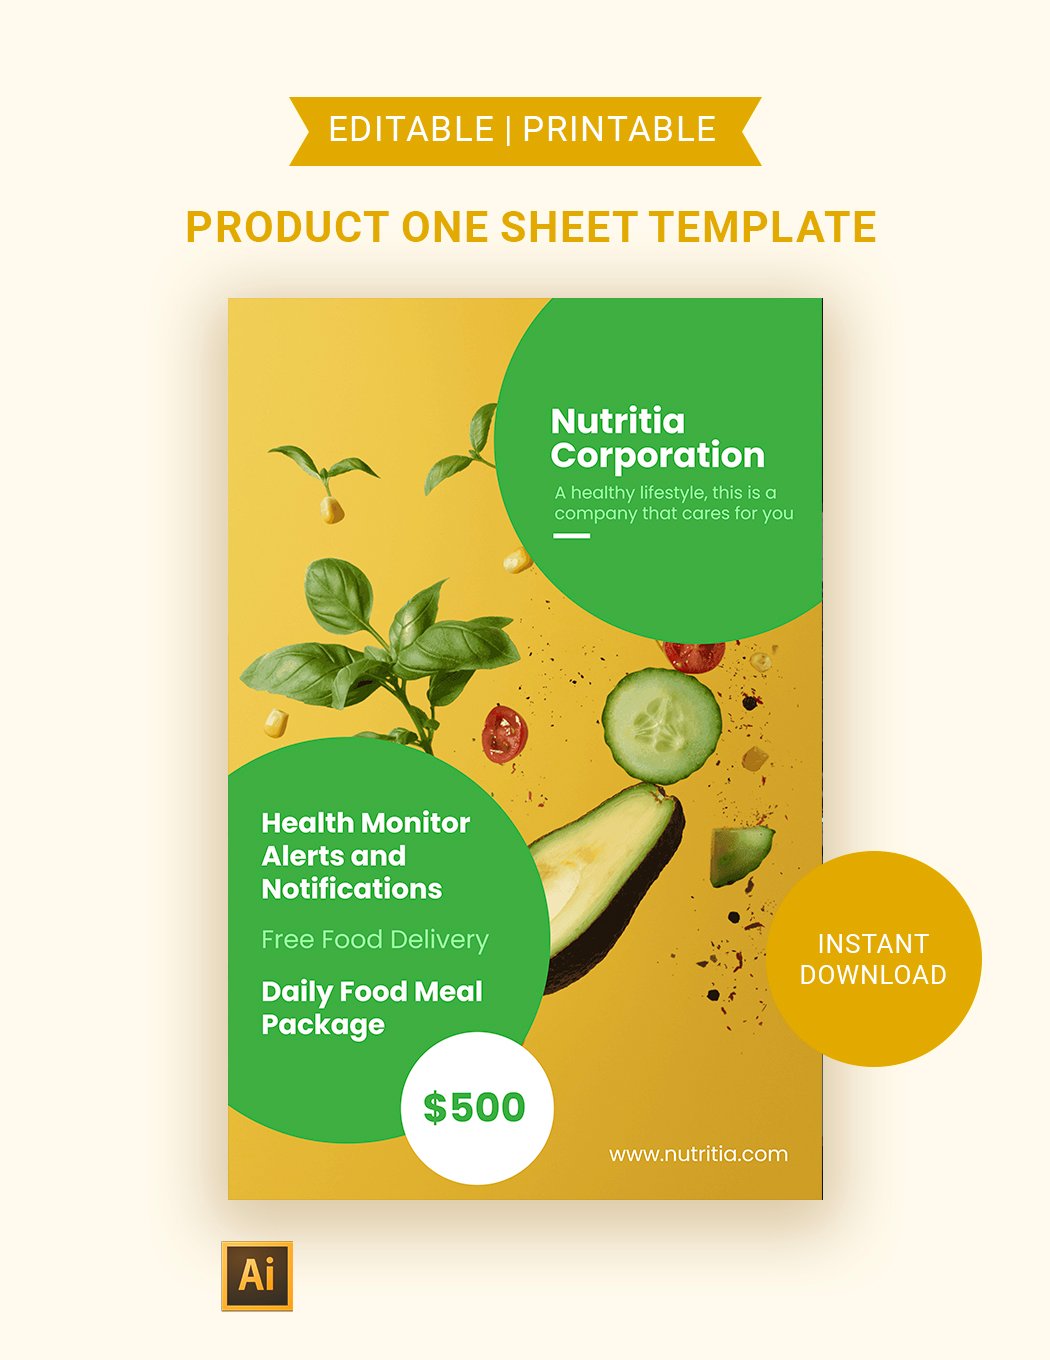 Product One Sheet Template